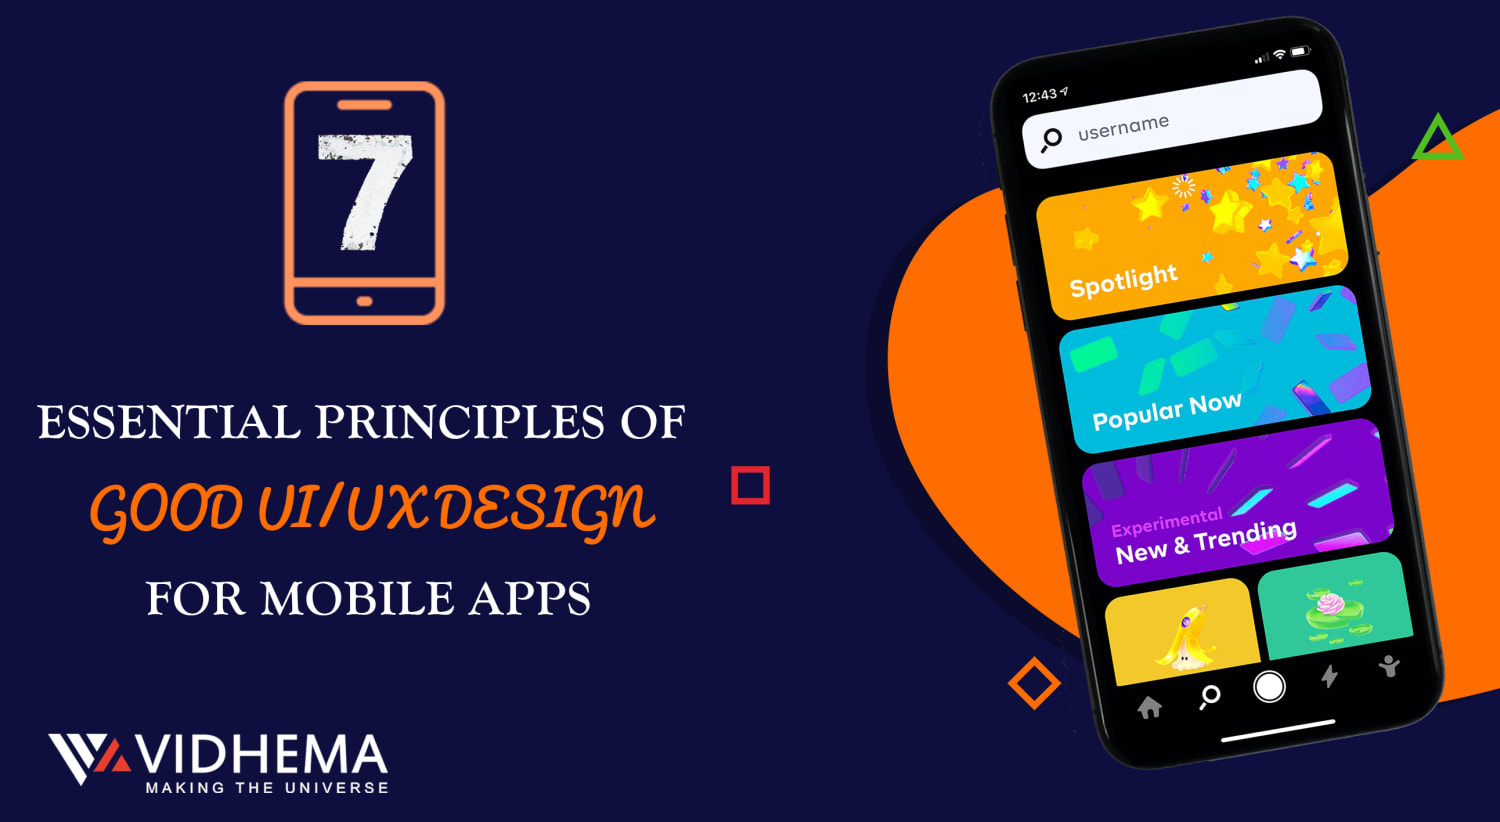 7 Essential Principles of Good UI/UX Design for Mobile Apps